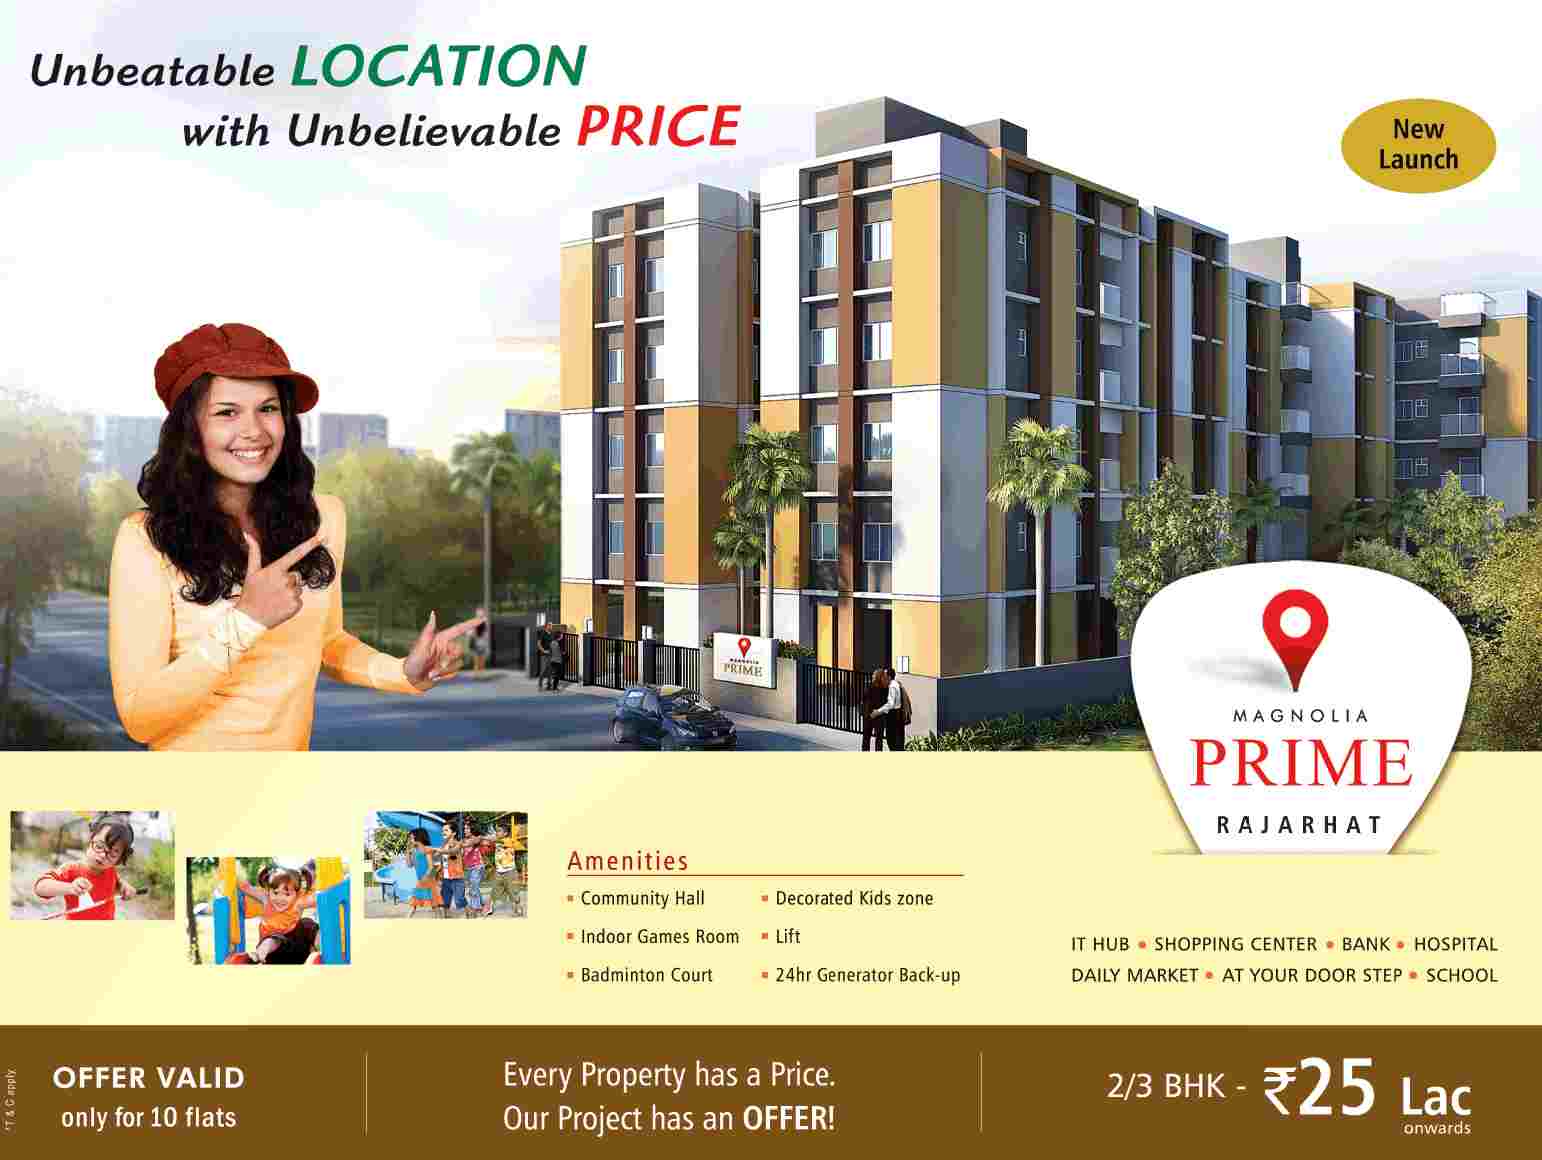 Live in unbeatable location with an unbelievable price at Magnolia Prime in Kolkata Update